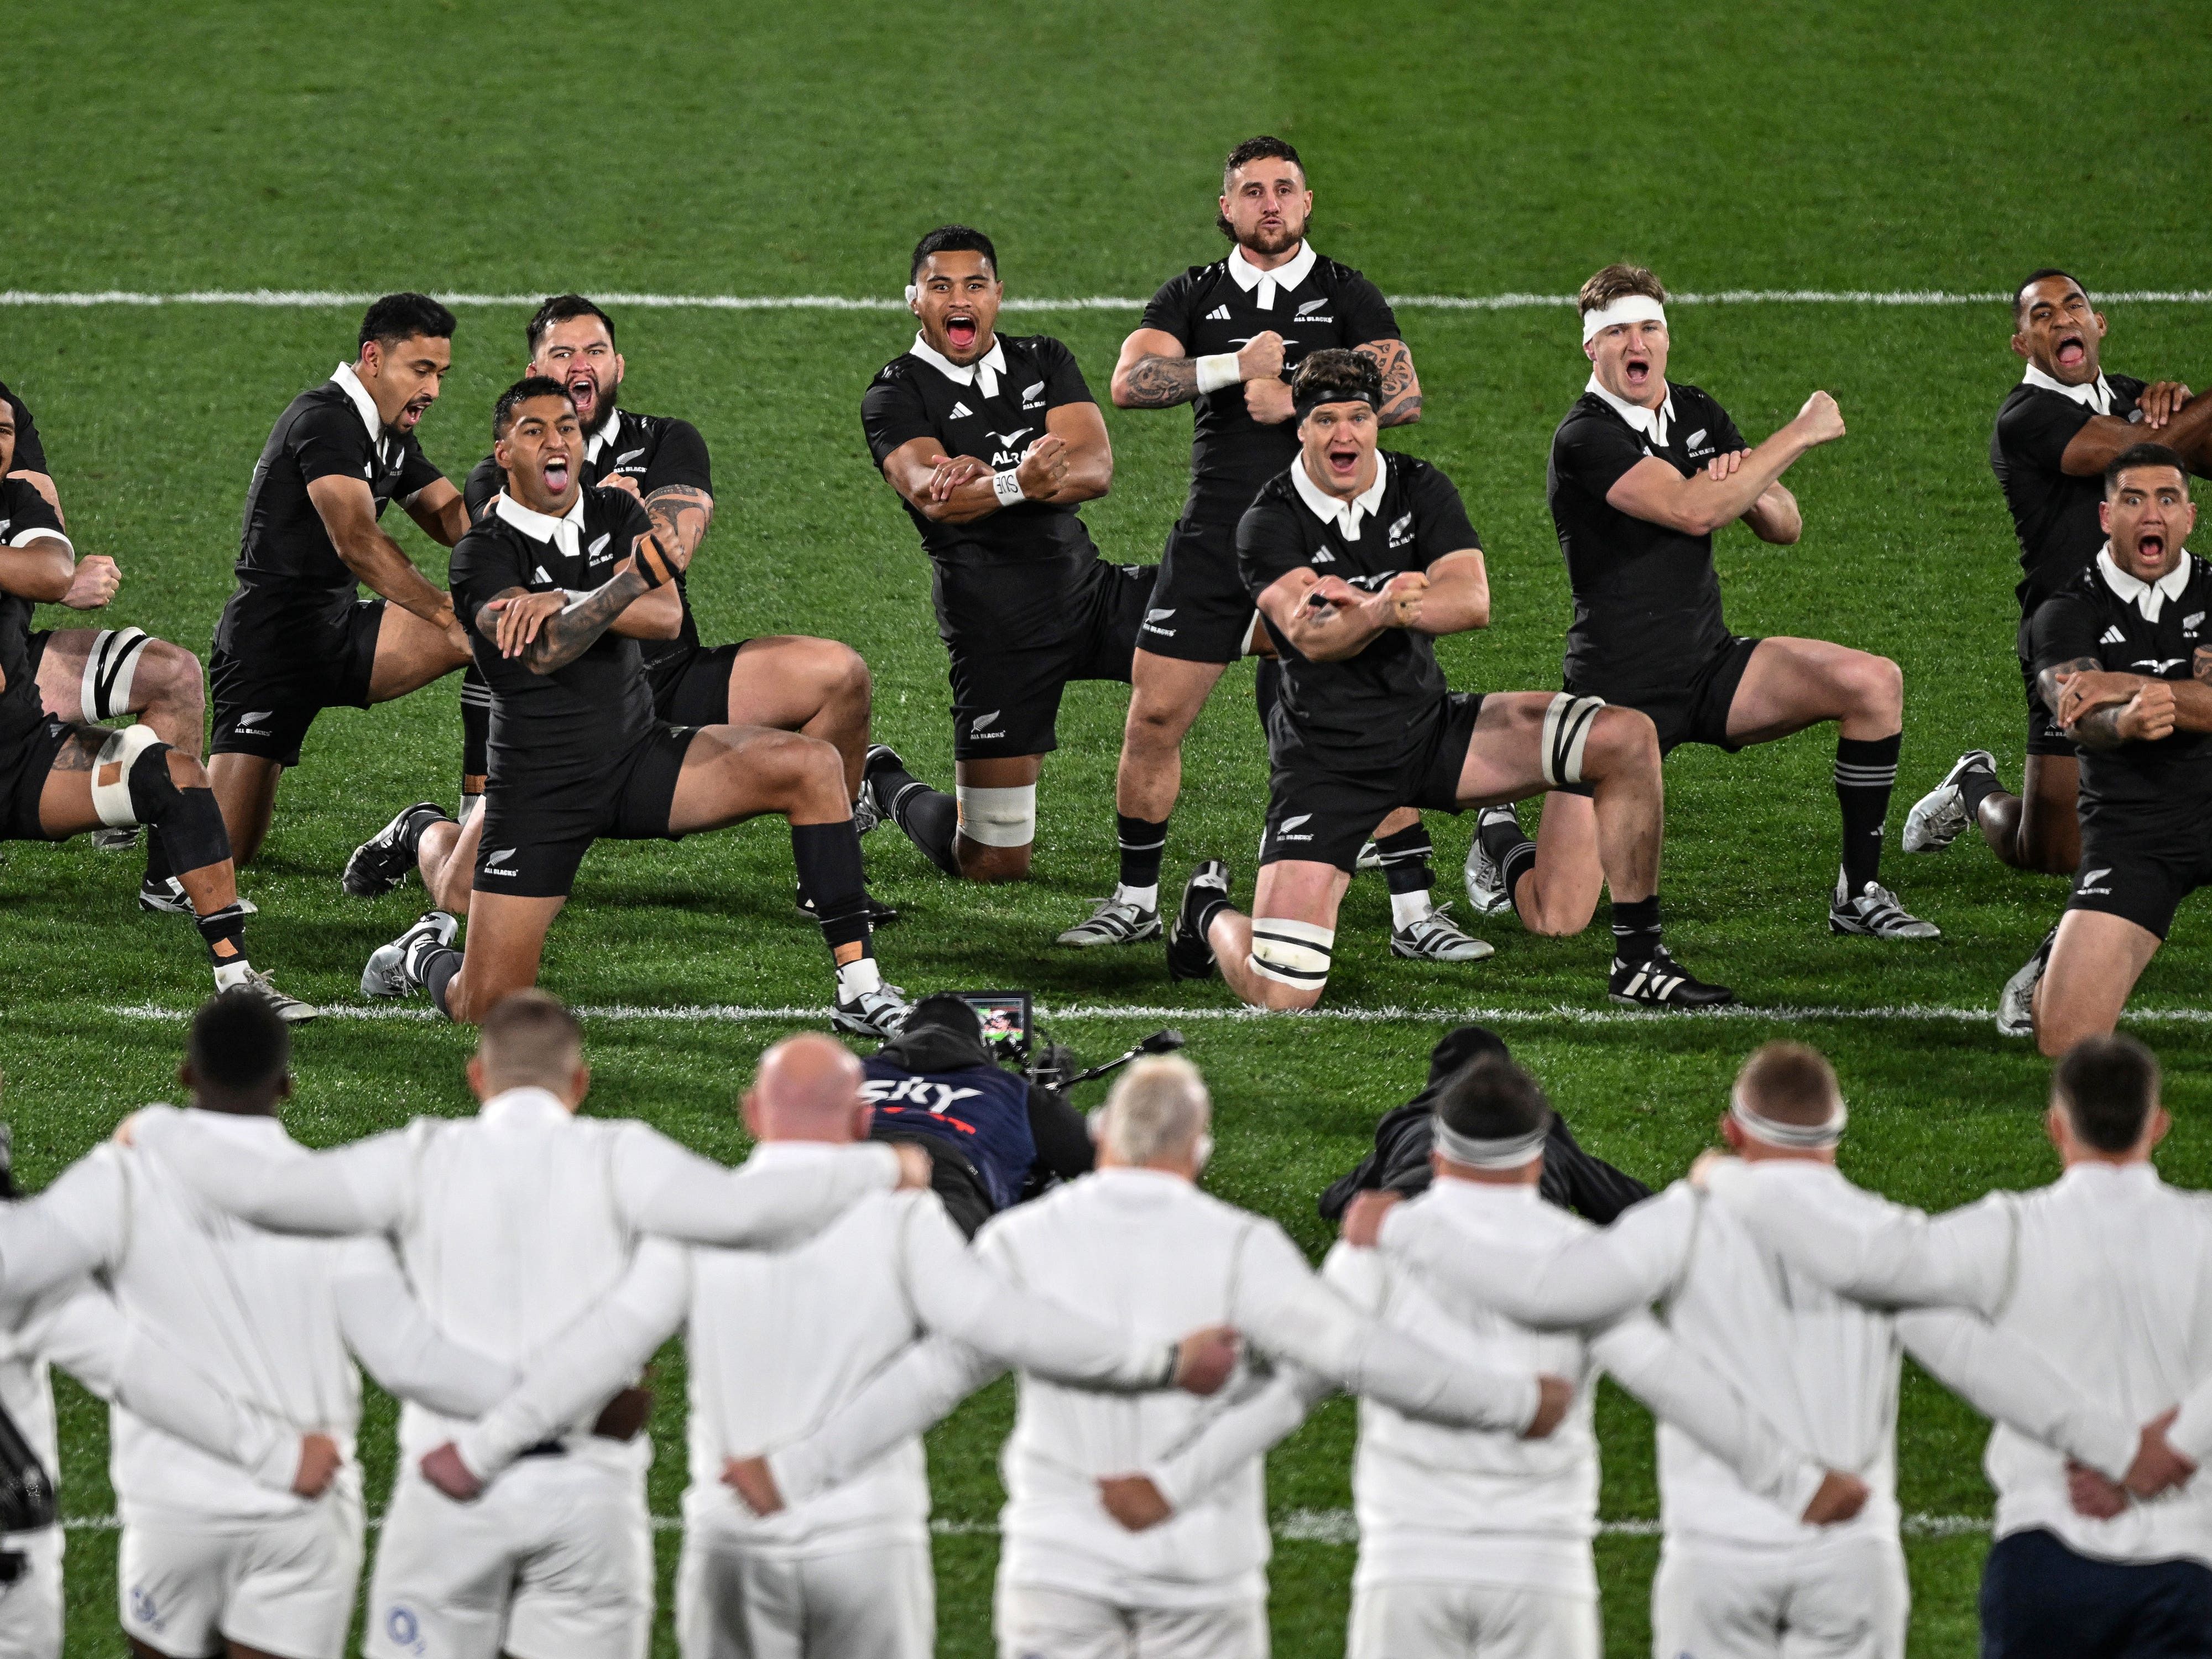 Jamie George laments ‘fine margins’ after England slip to New Zealand defeat